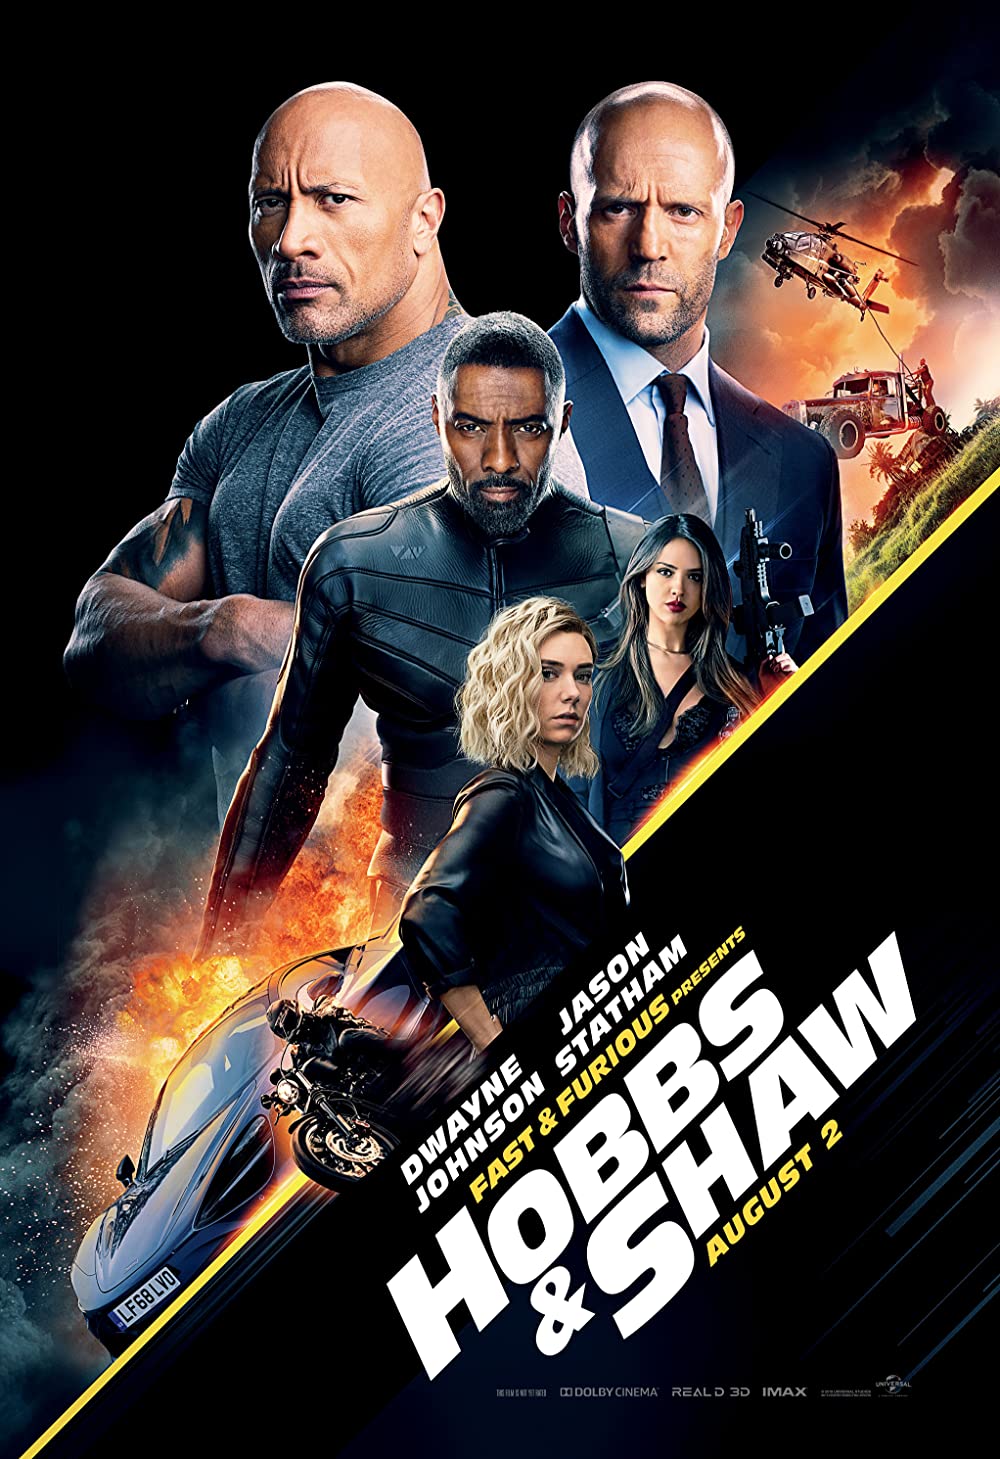 Fast & Furious Presents: Hobbs & Shaw Plot Synopsis